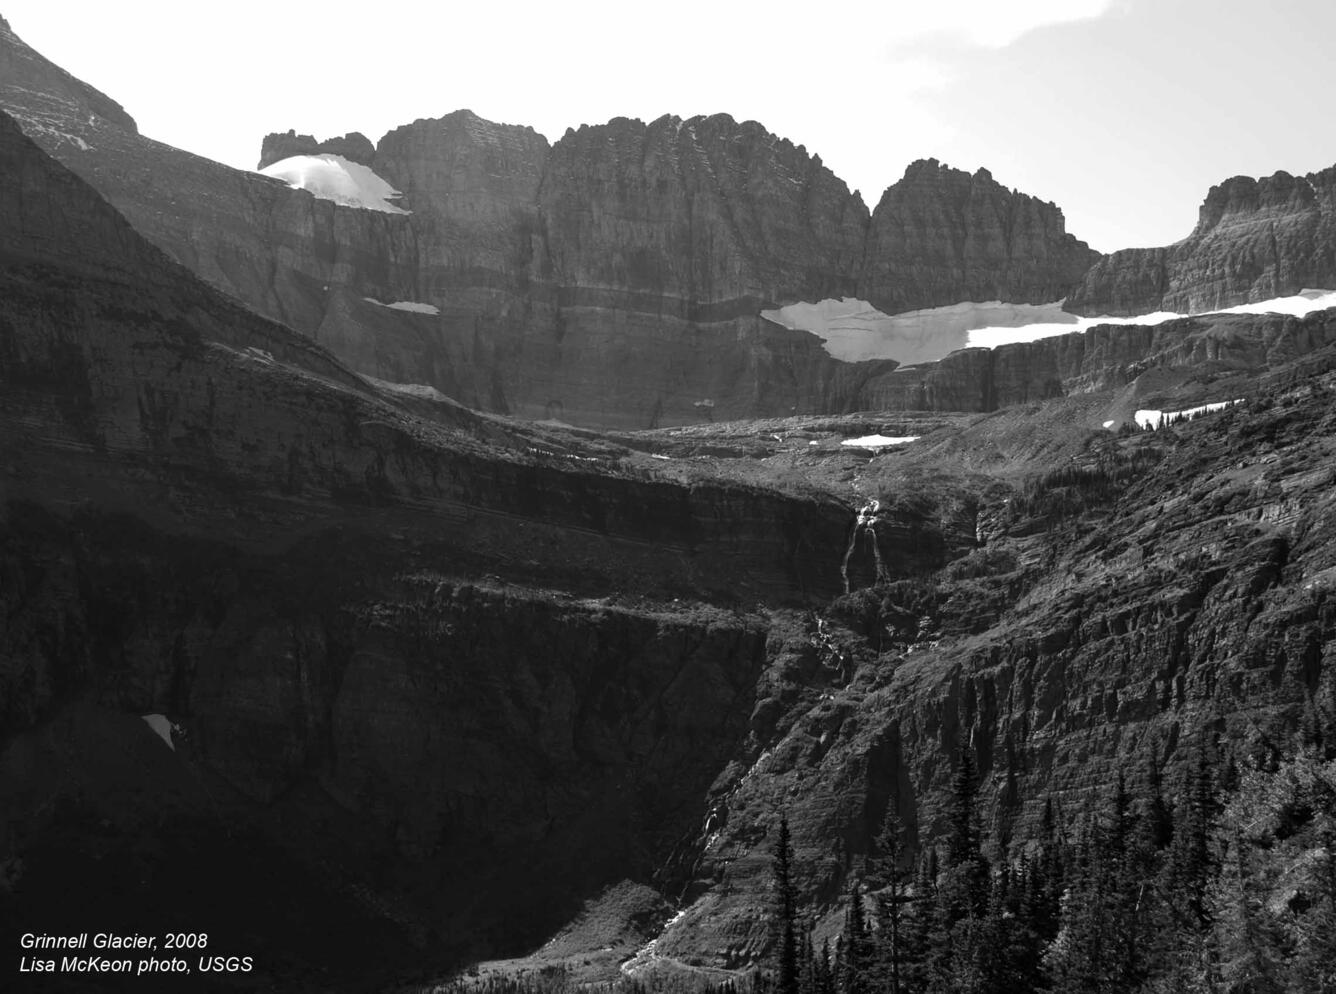 Grinnell Glacier from trail 2008 - black and white